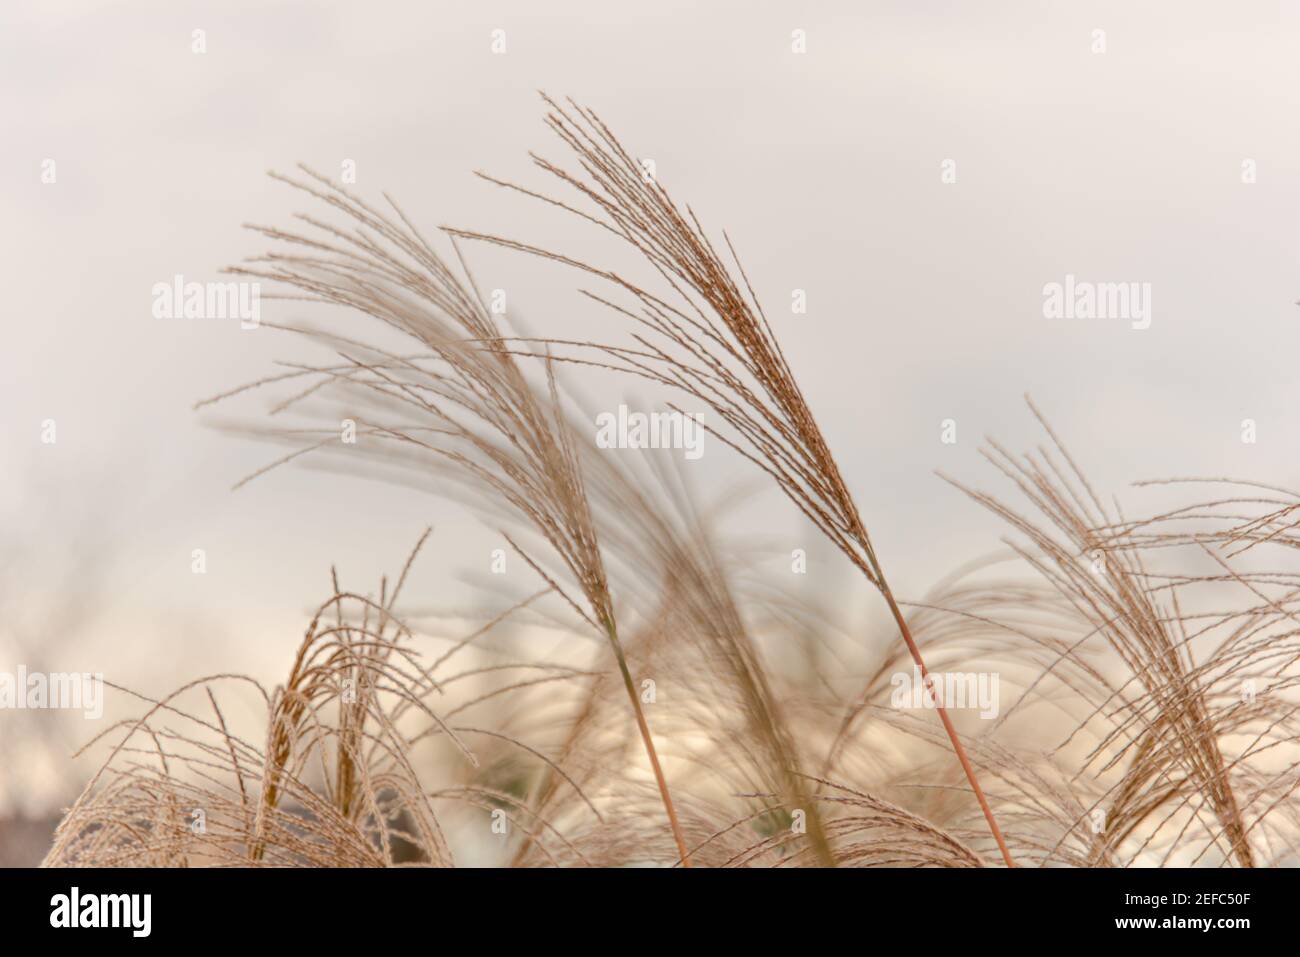 Japan background with reeds waving on backlight in the sunset moment Stock Photo